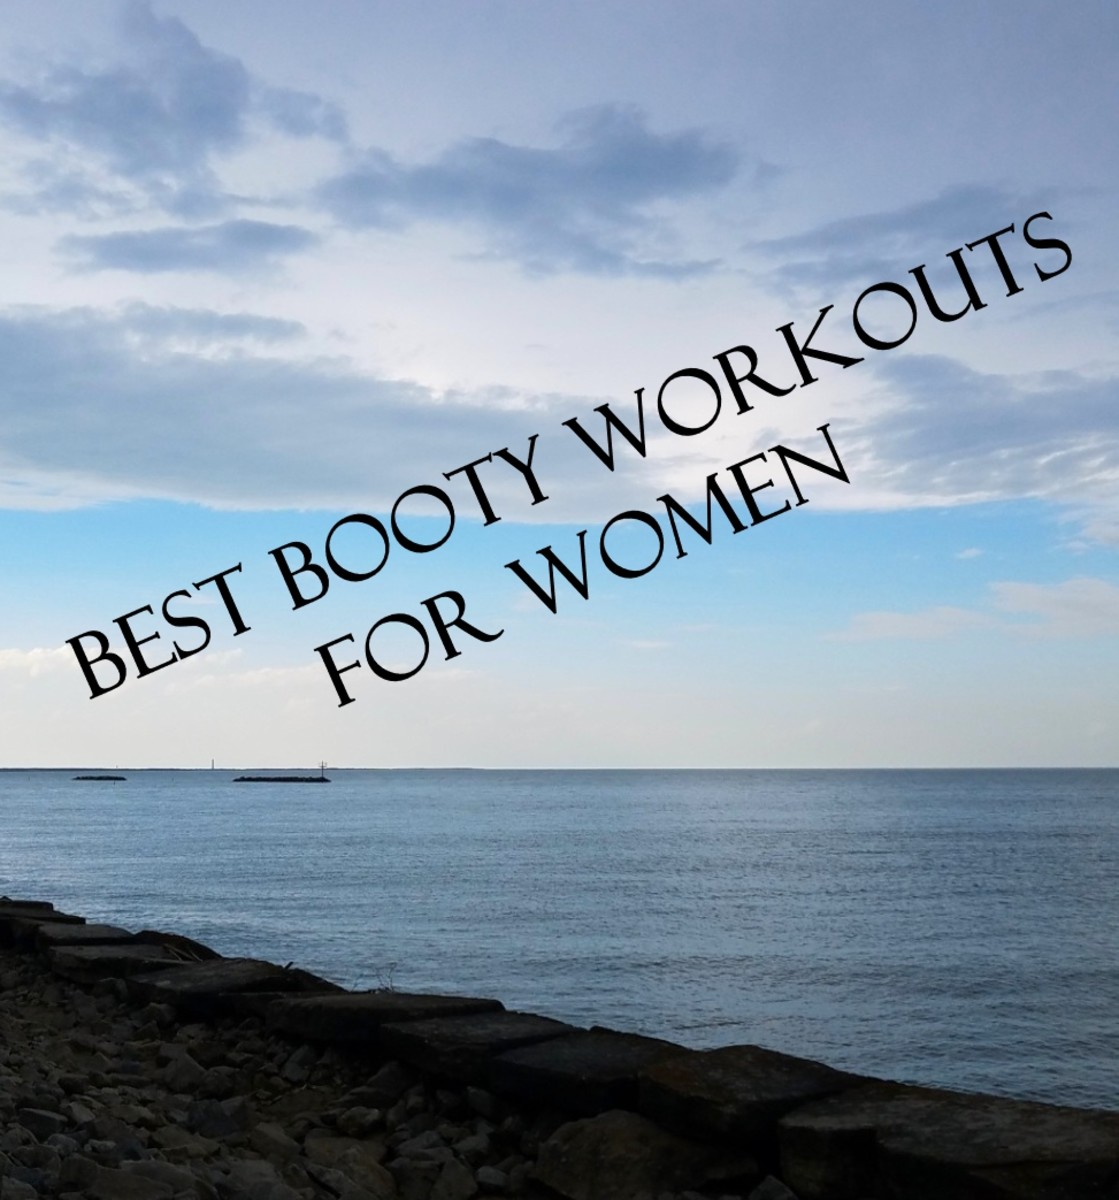 Best Booty Workouts for Women